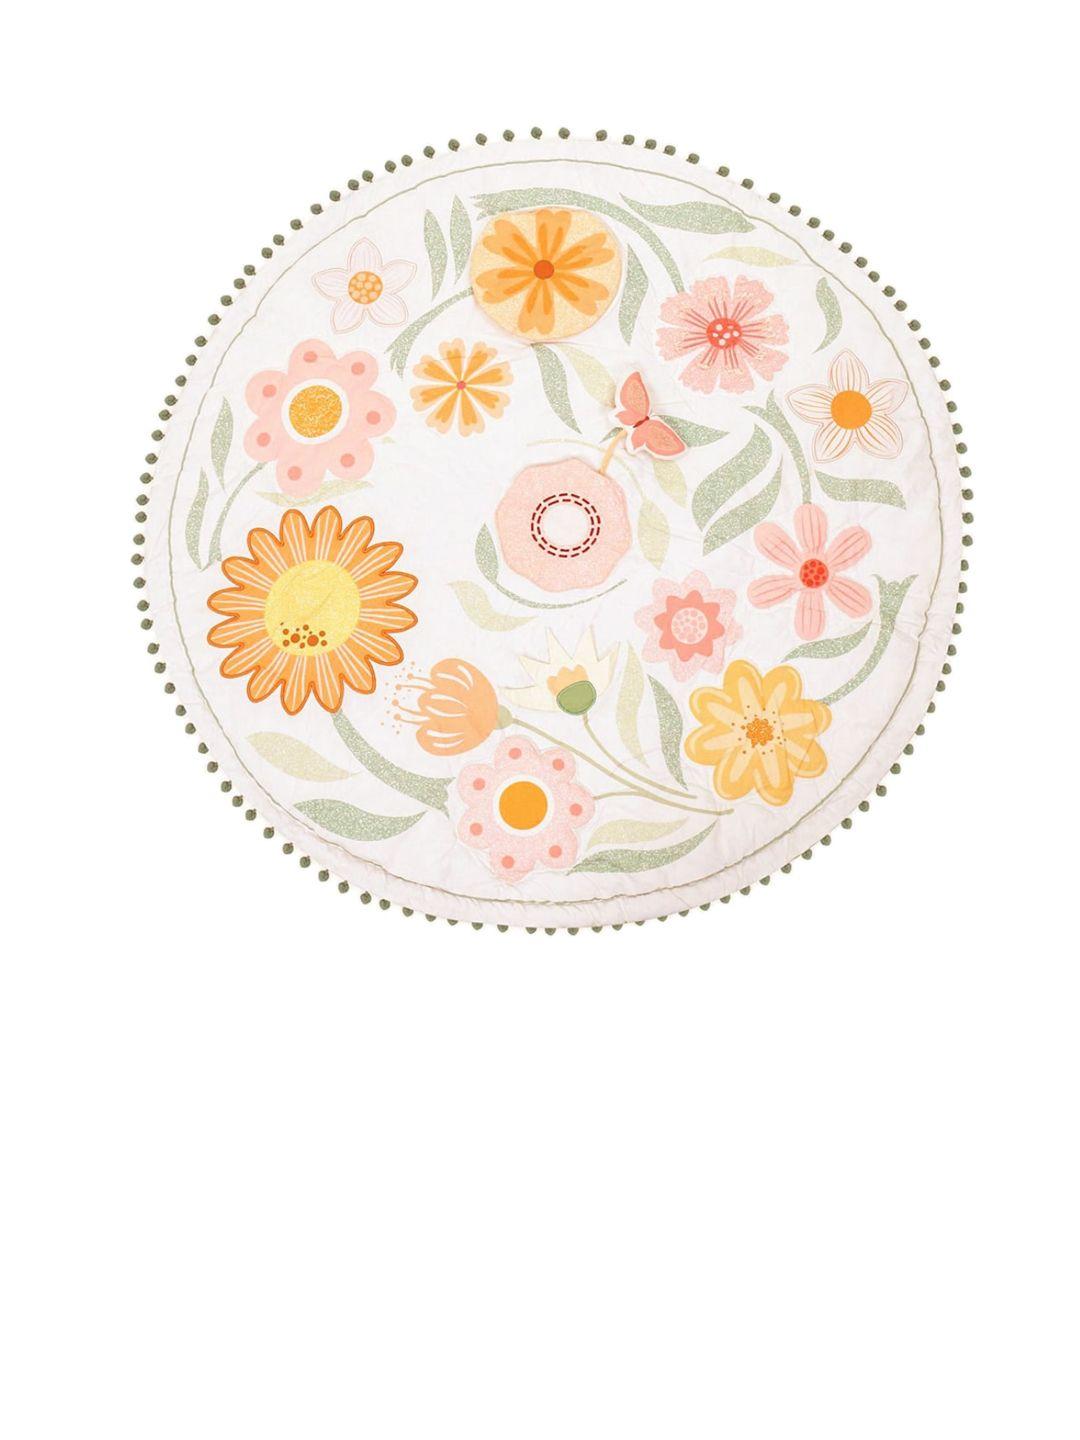 haus & kinder kids floral printed pure cotton baby activity mat